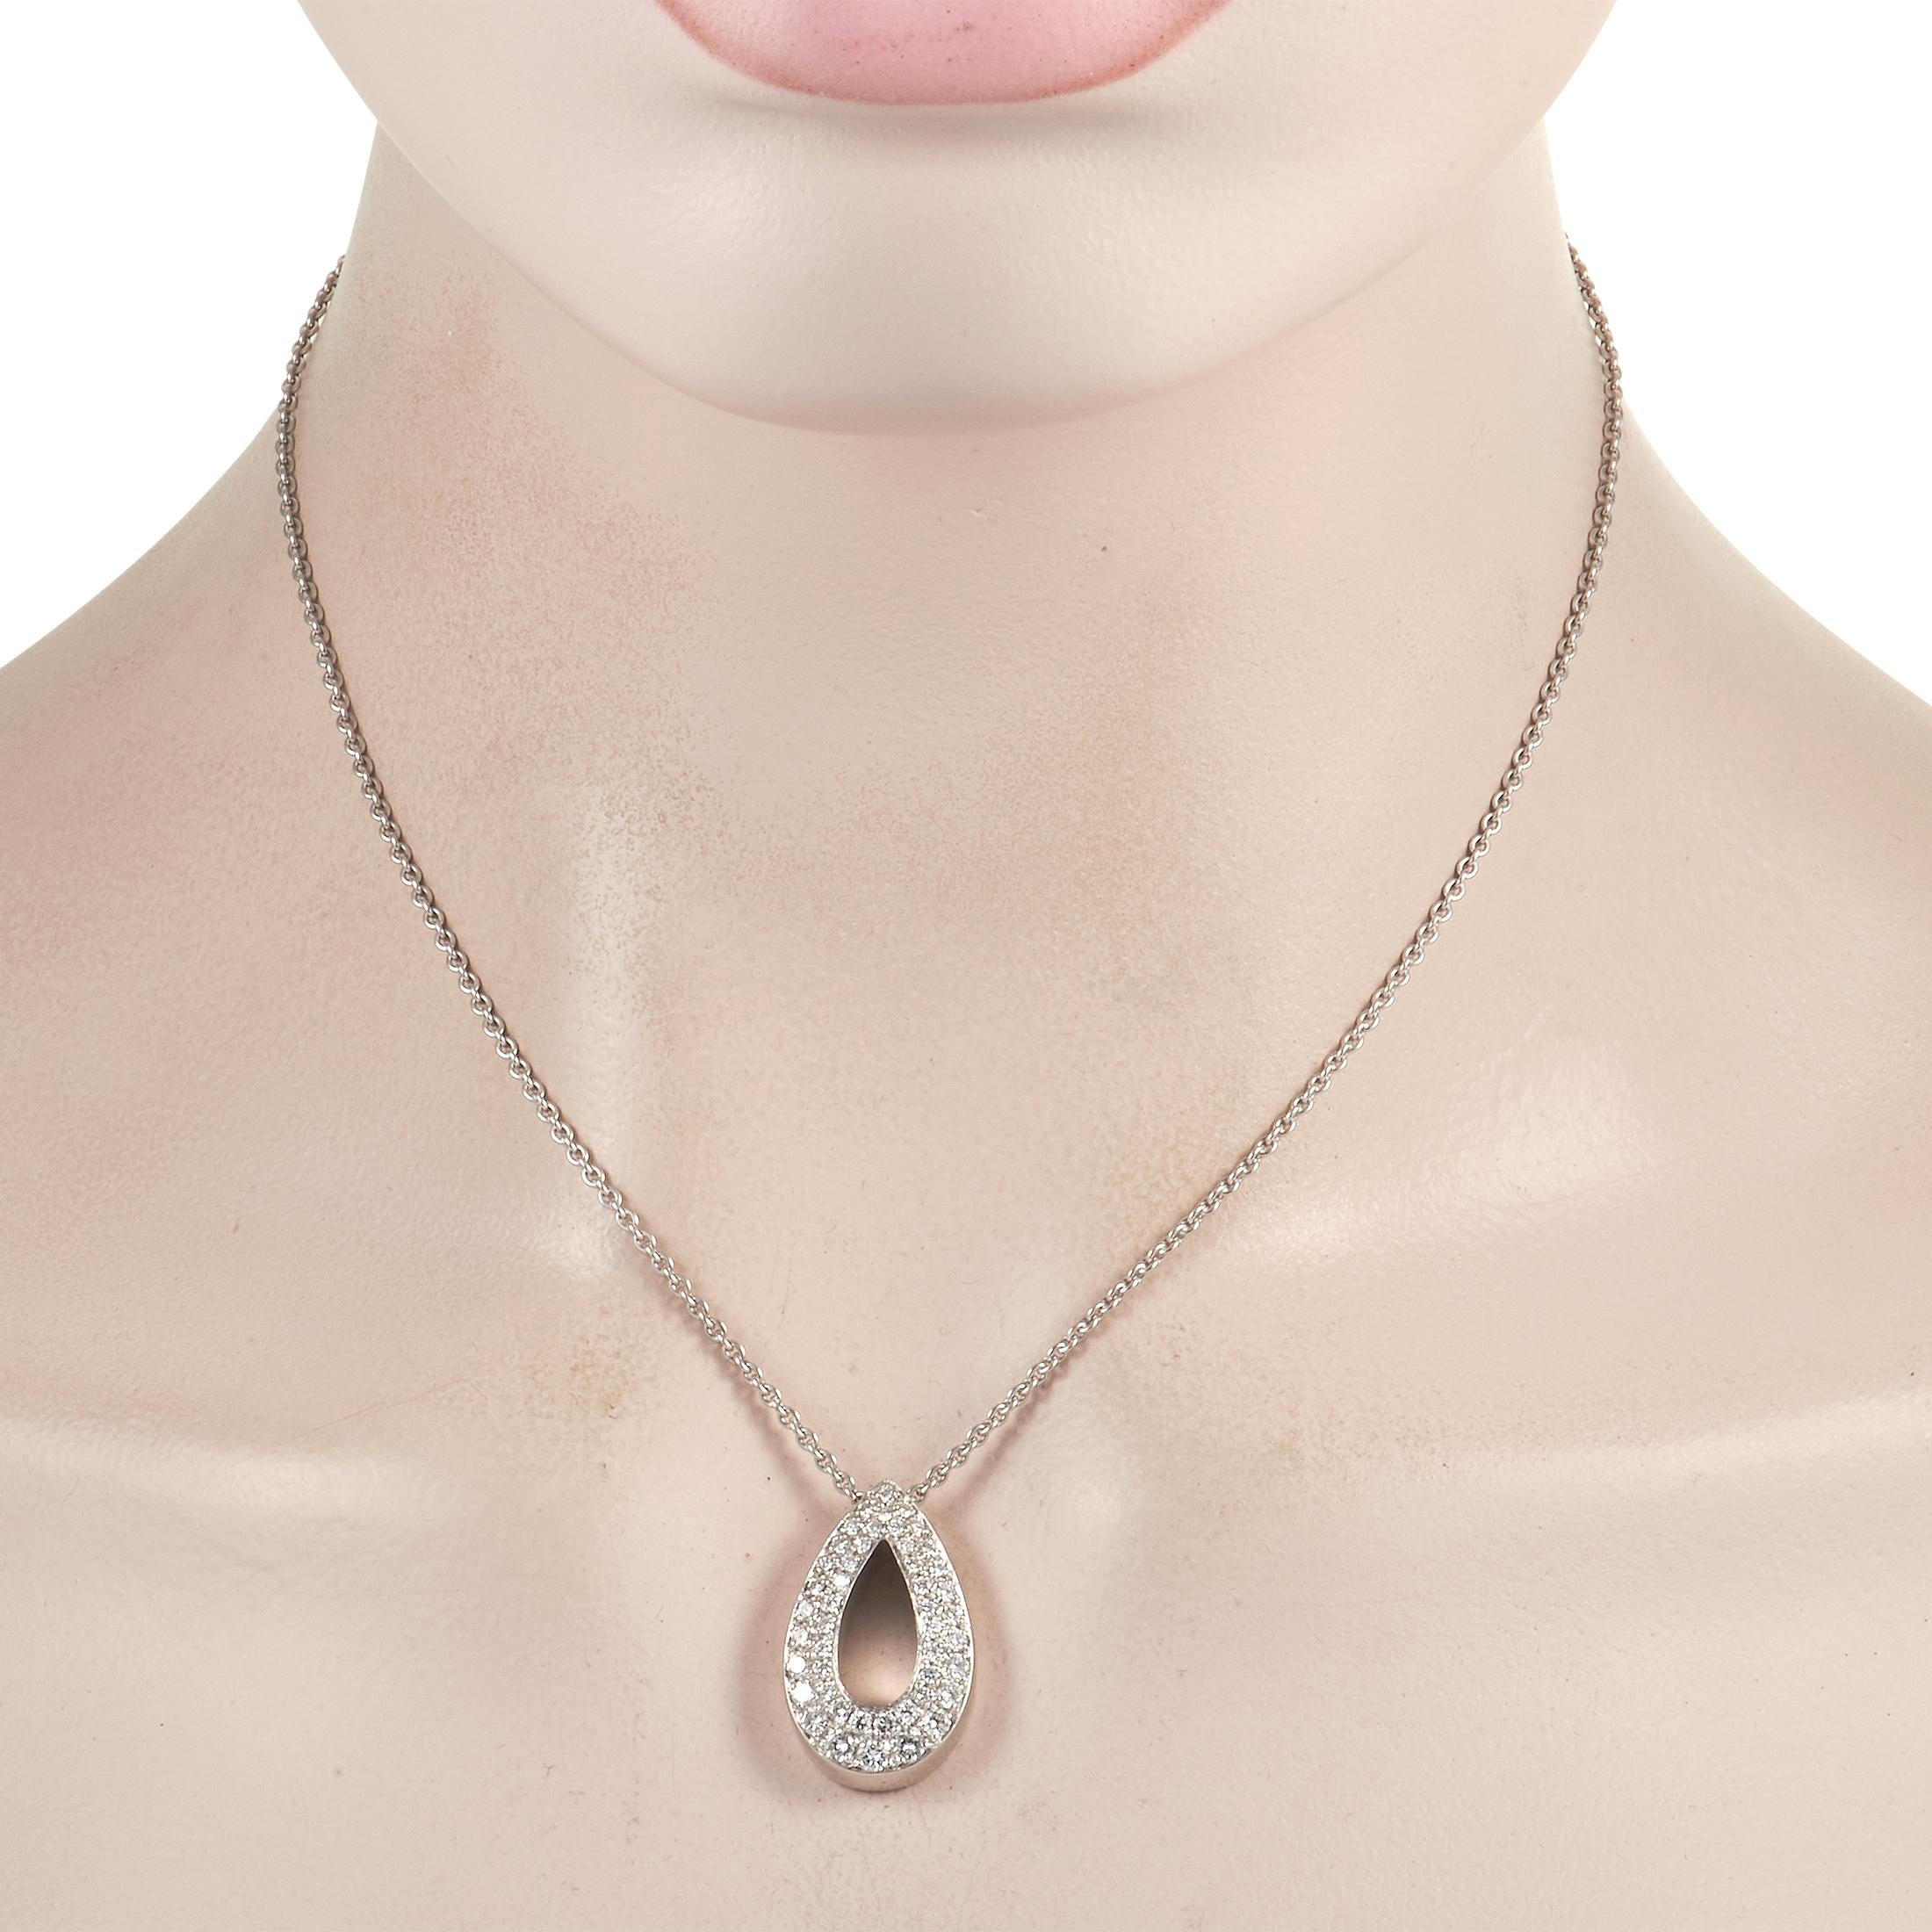 Bold and breathtaking, this Piaget necklace is a luxury piece with an unforgettable sense of style. Suspended from a delicate 16” chain, an 18K White Gold pear-shaped pendant measures 1” long, 0.65” wide, and comes to life thanks to a dramatic